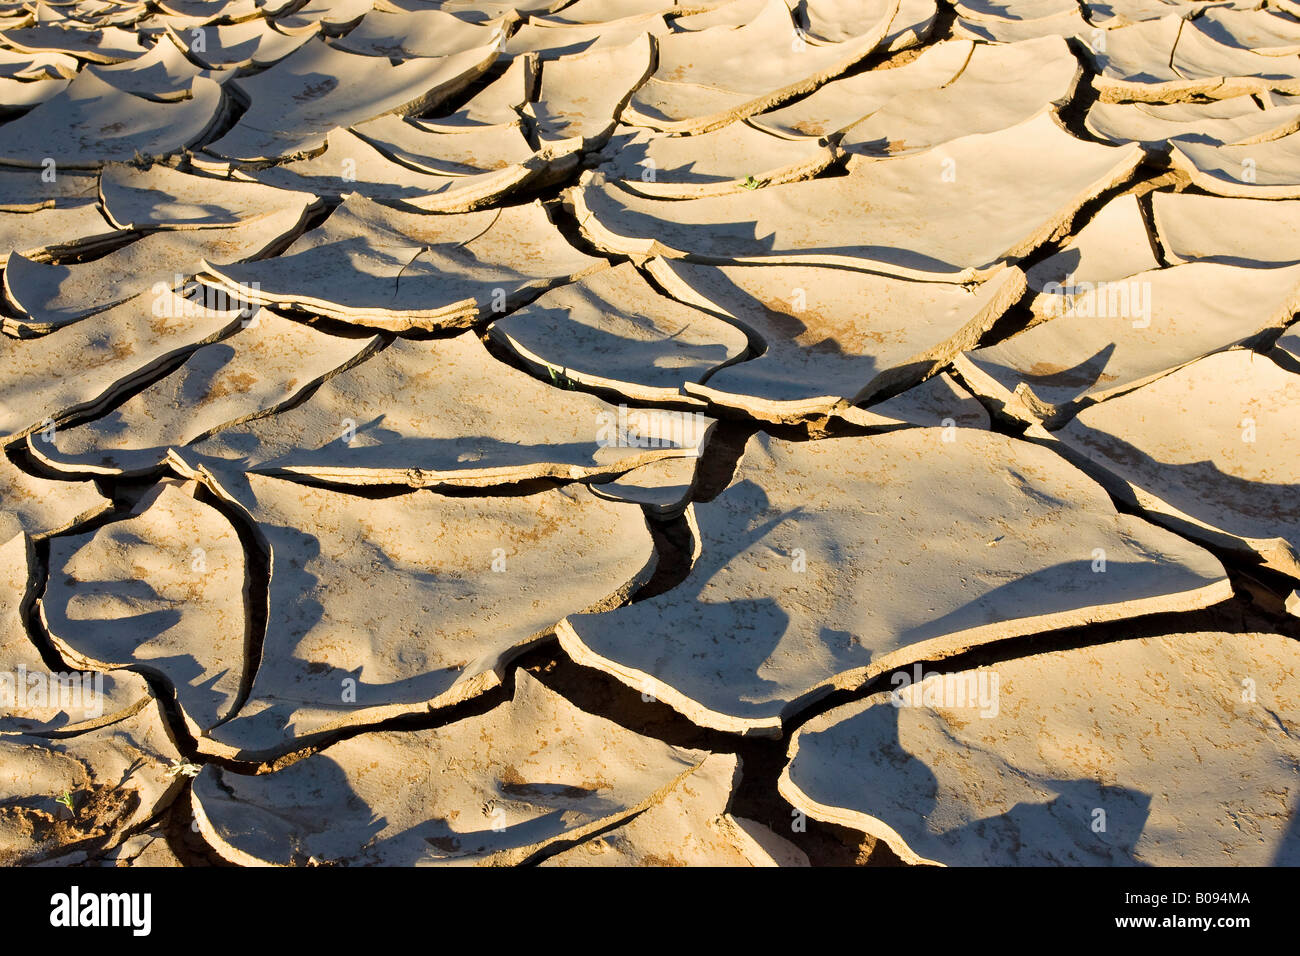 Dried up loamy soil in the dry riverbed of the Tsauchab River, Namib Desert, Namibia, Africa Stock Photo